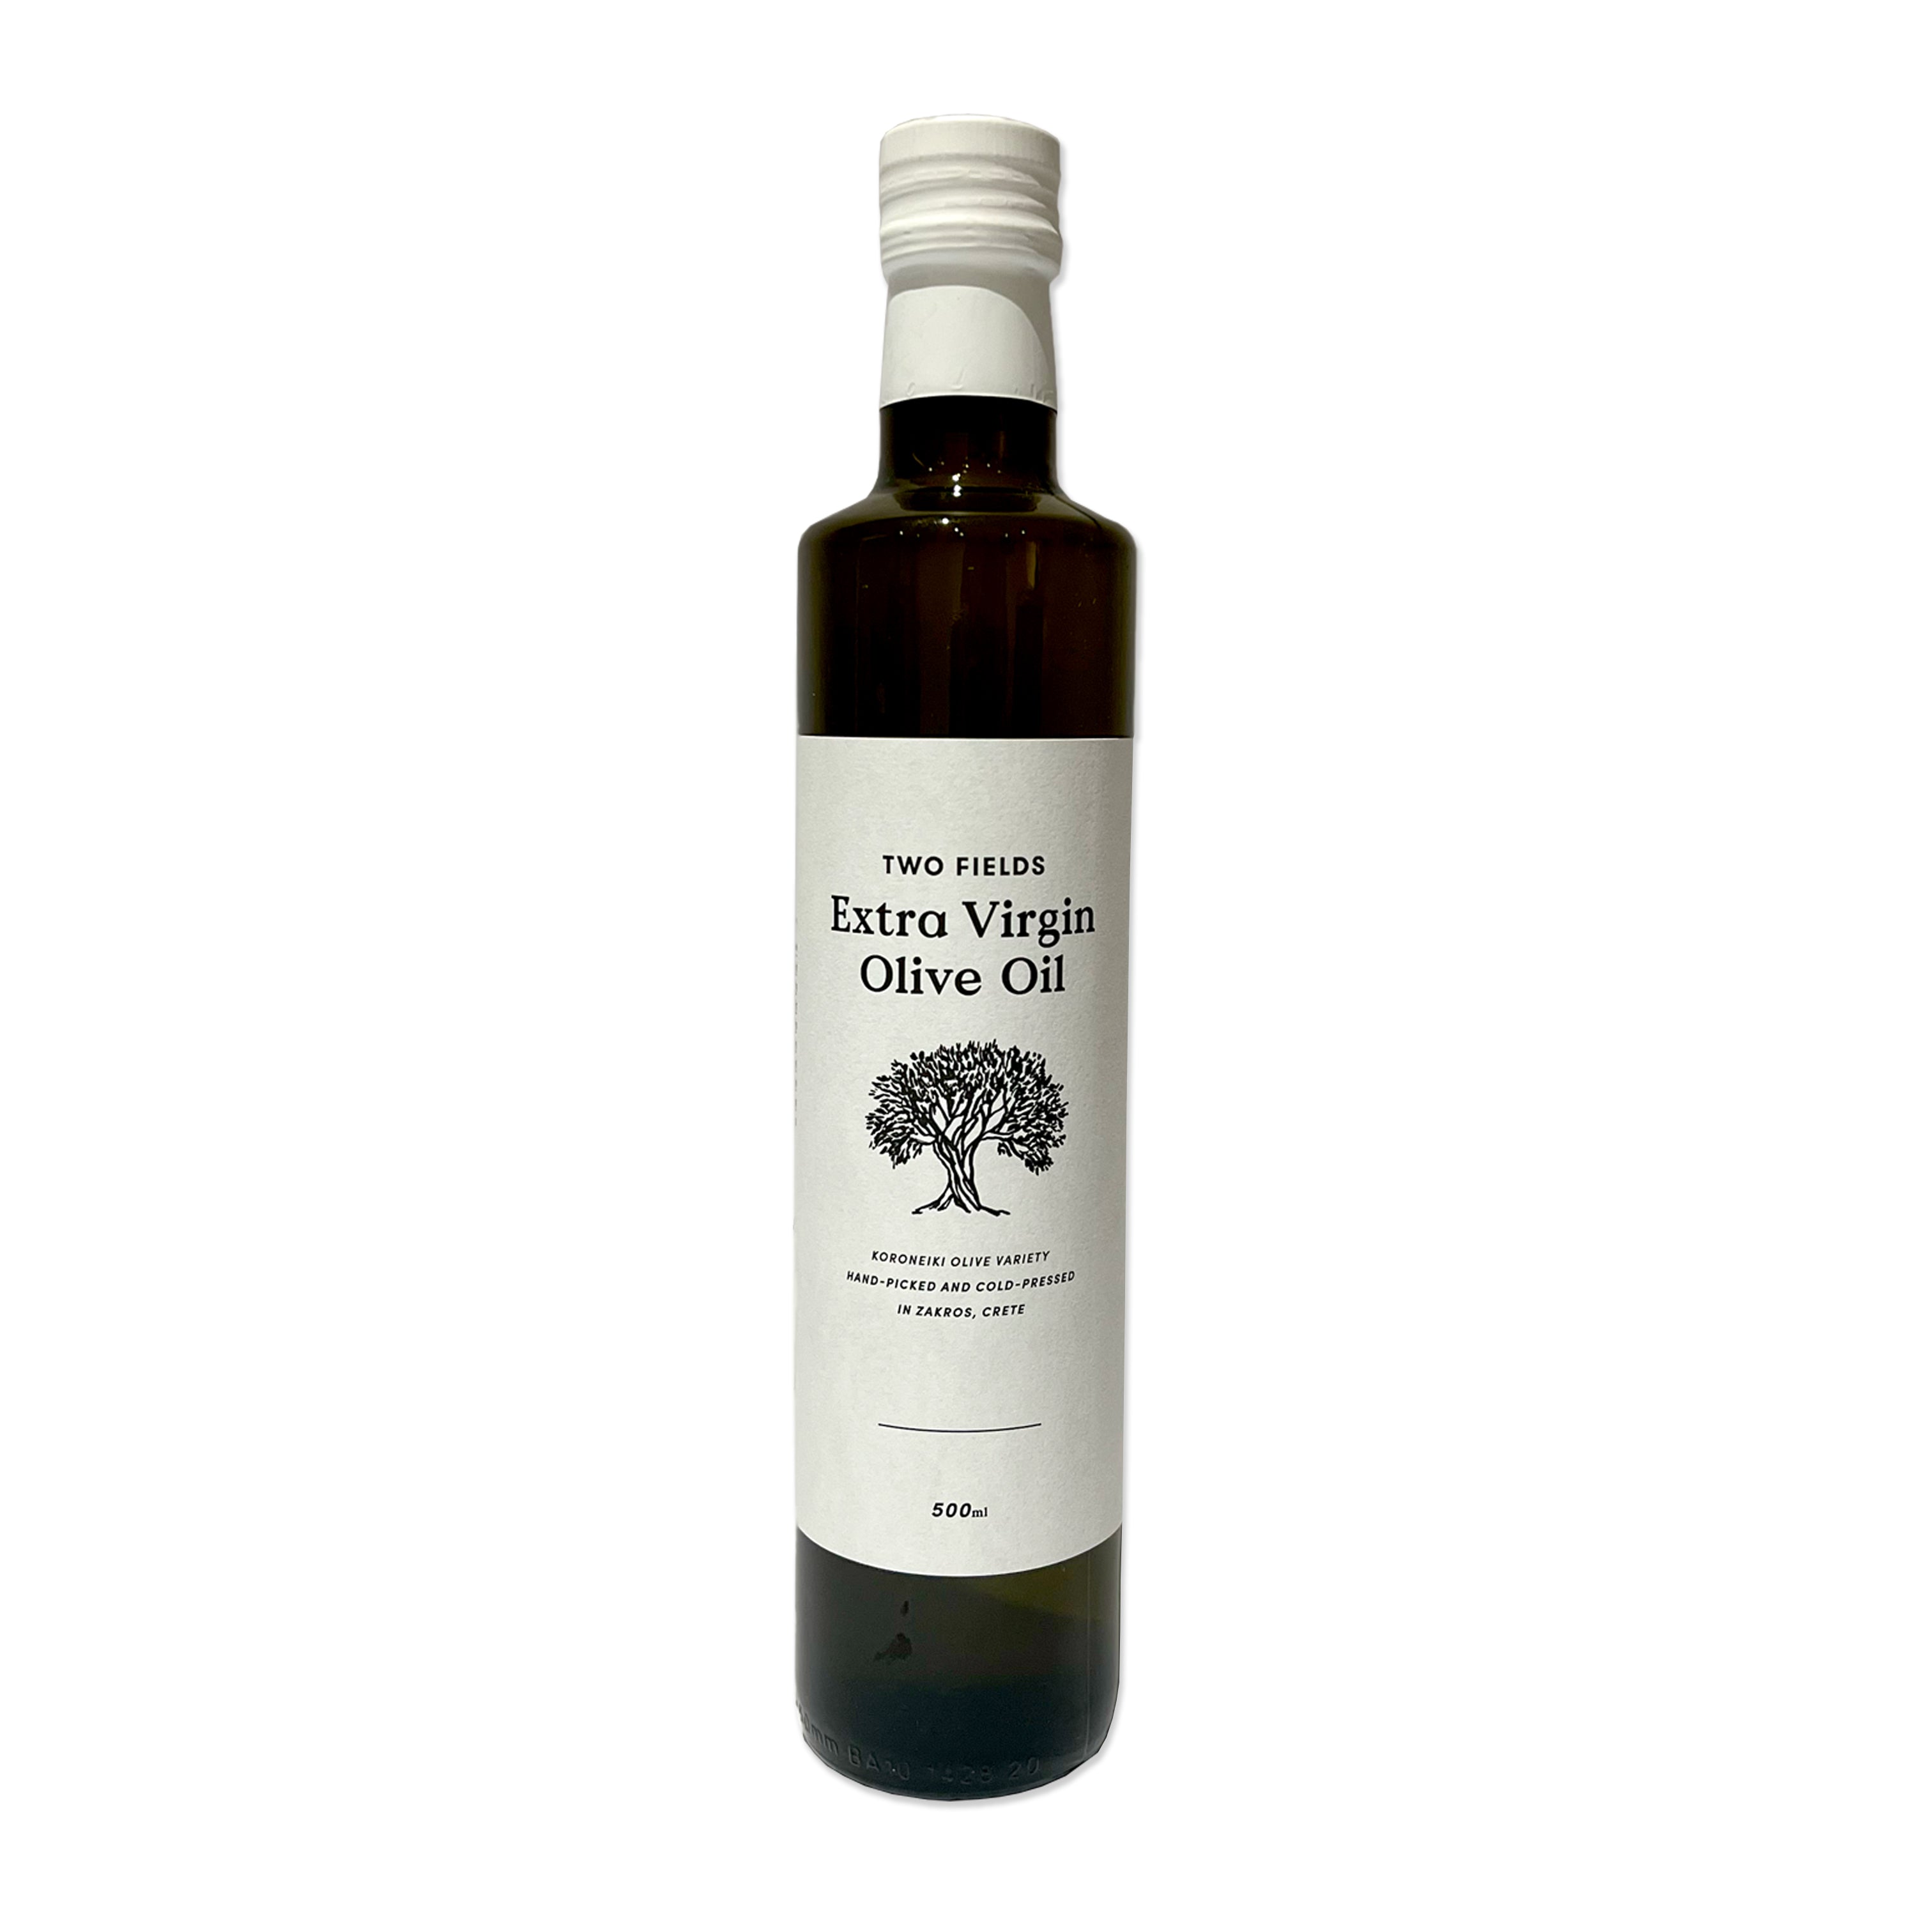 Two Fields Extra Virgin Olive Oil